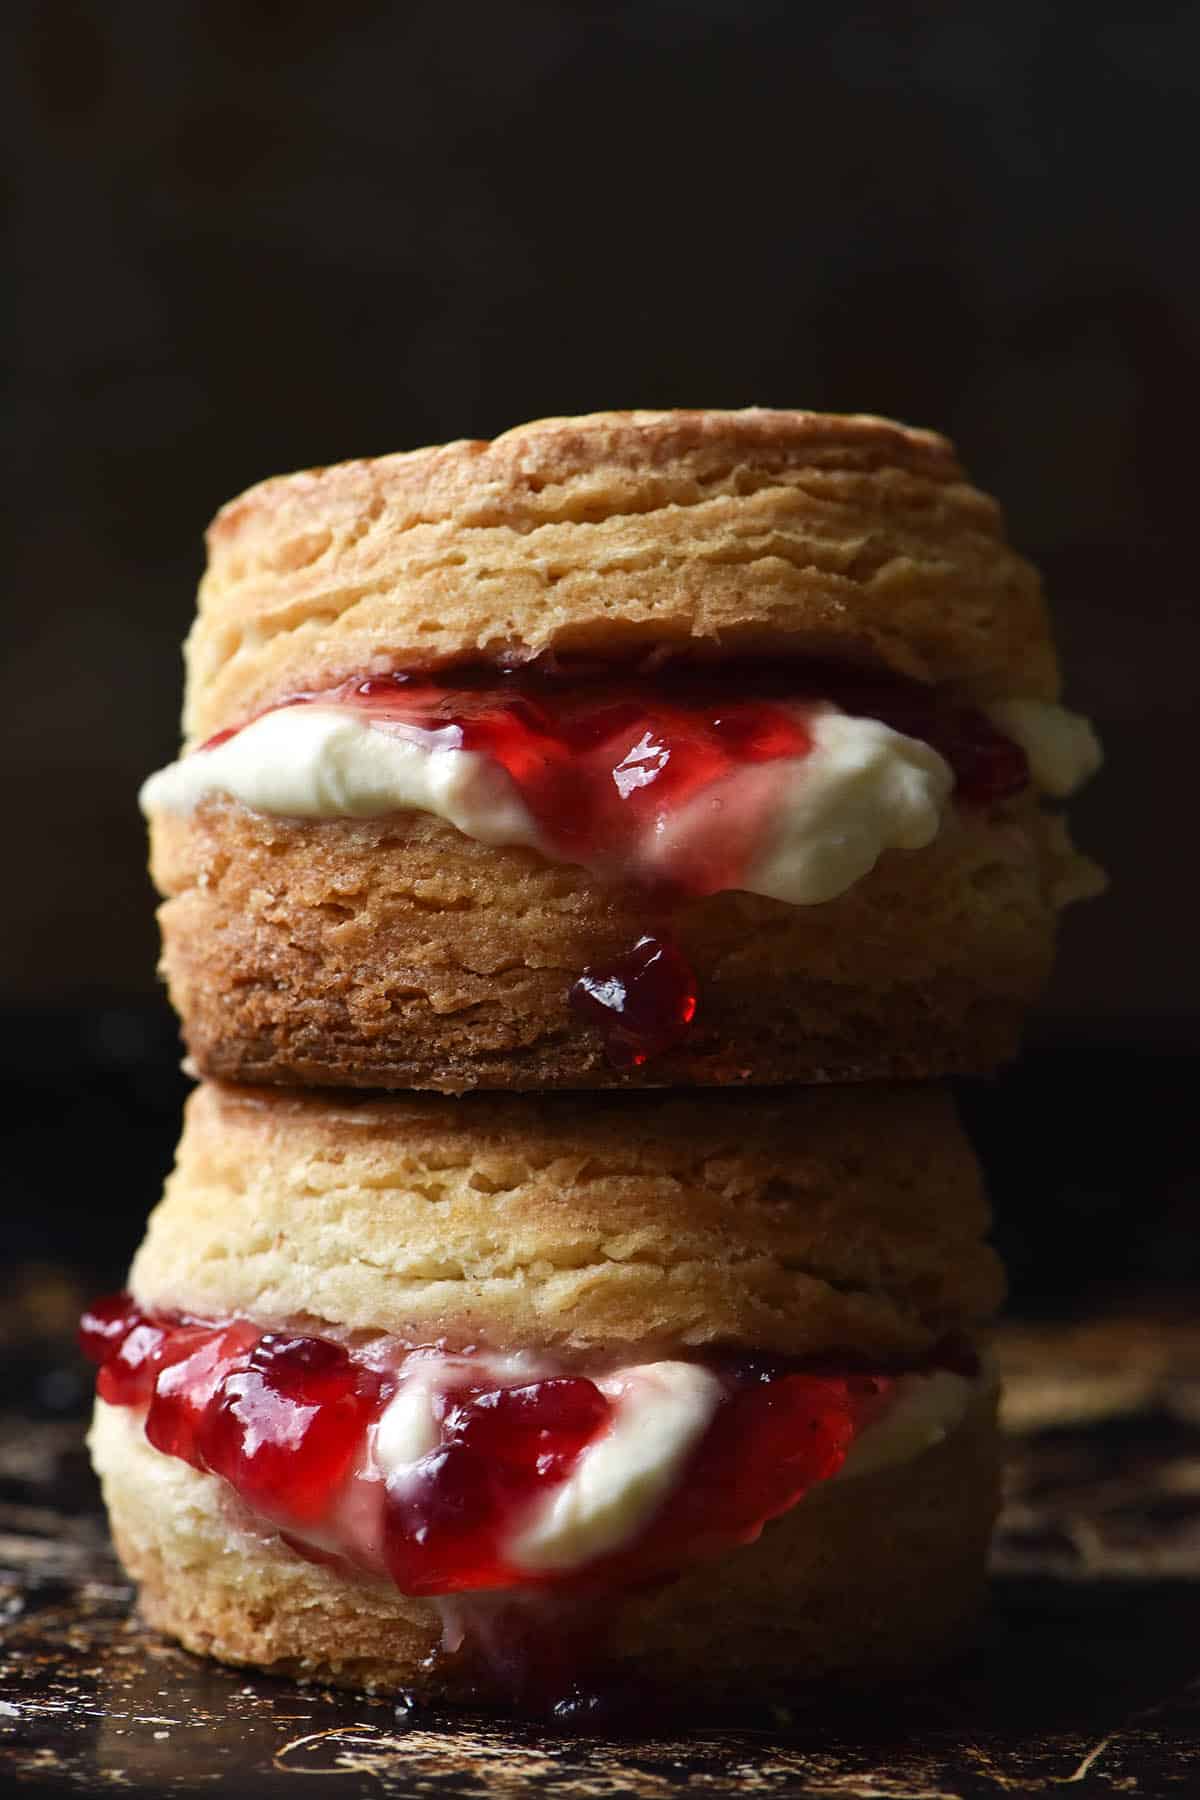 A stack of two flaky gluten free scones filled with jam and cream against a dark and moody backdrop